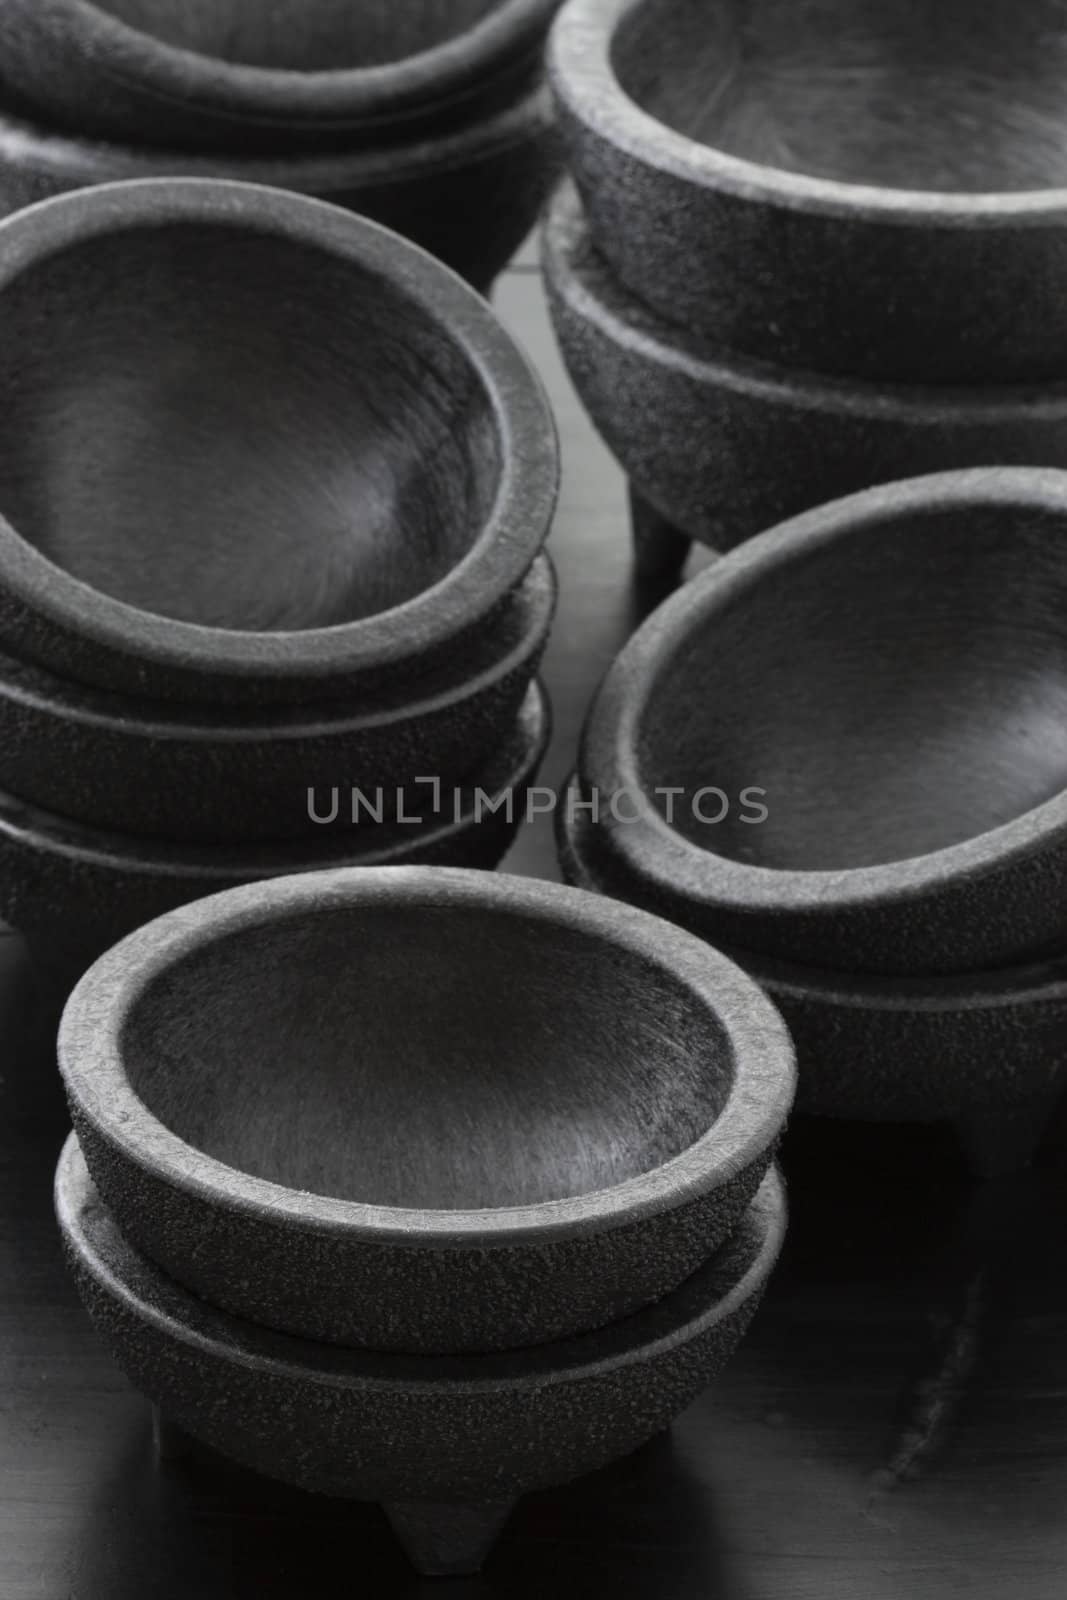 plastic molcajetes ideal to serve salsas, guacamole, jalape�os, pico de gallo and other delicious mexican sauces.